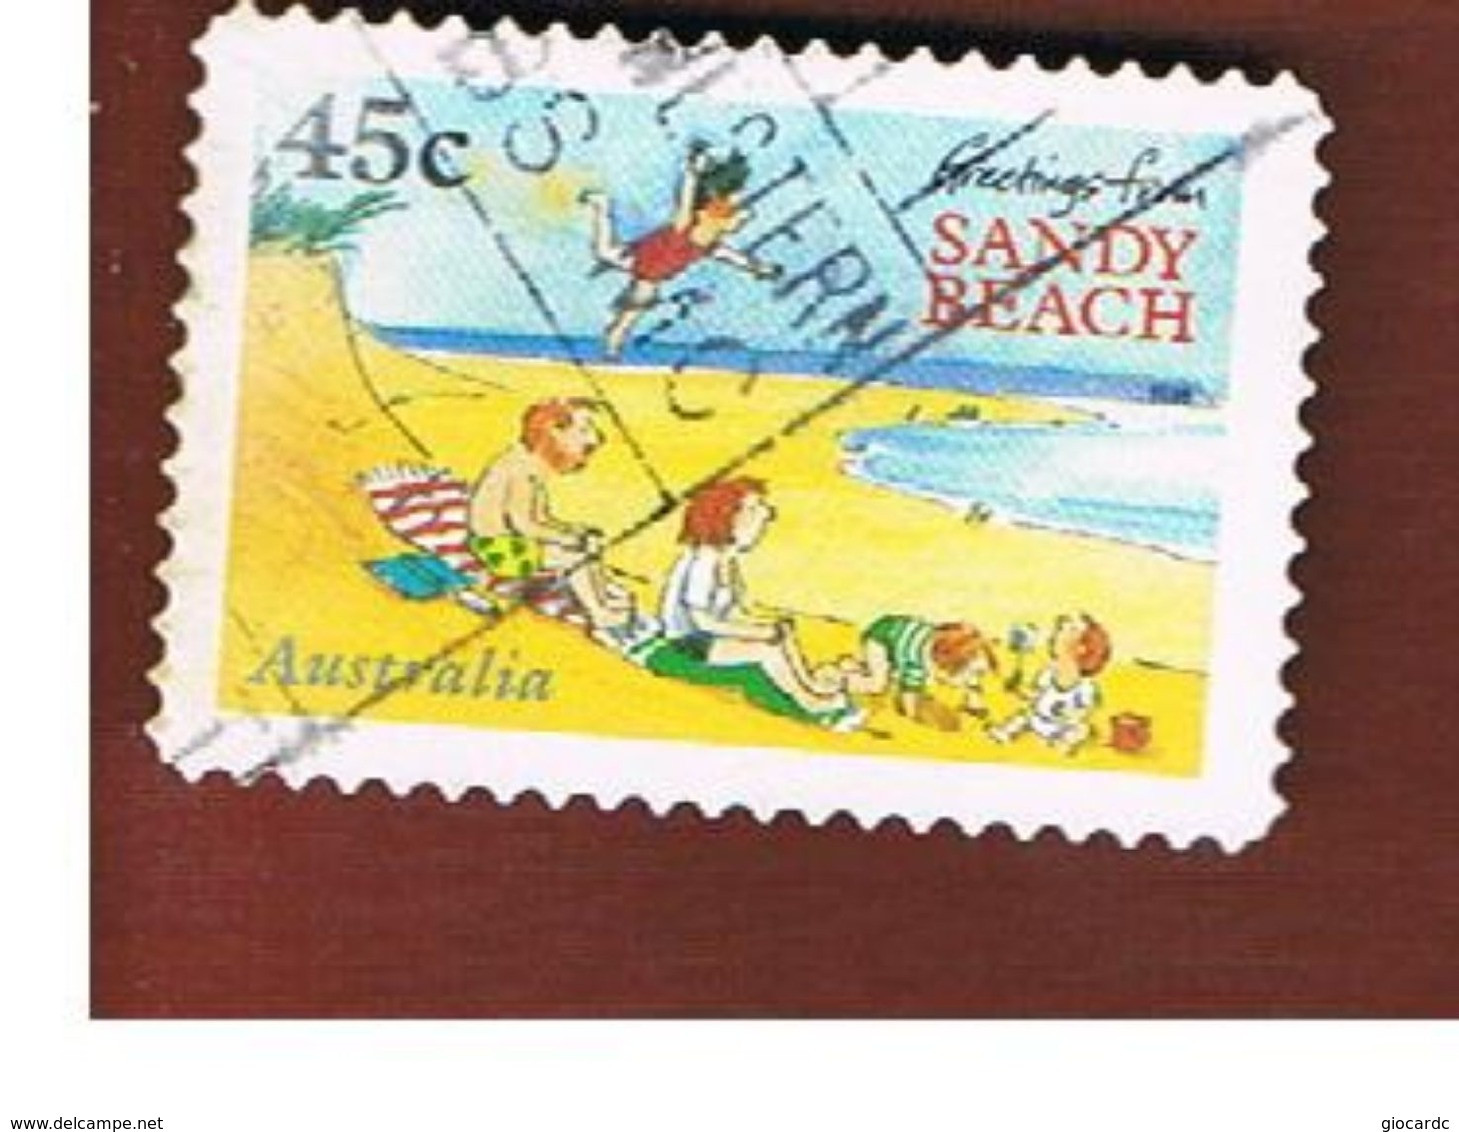 AUSTRALIA  -  SG 1635 -      1996  BOOKS FOR CHILDREN: SANDY BEACH         -       USED - Used Stamps